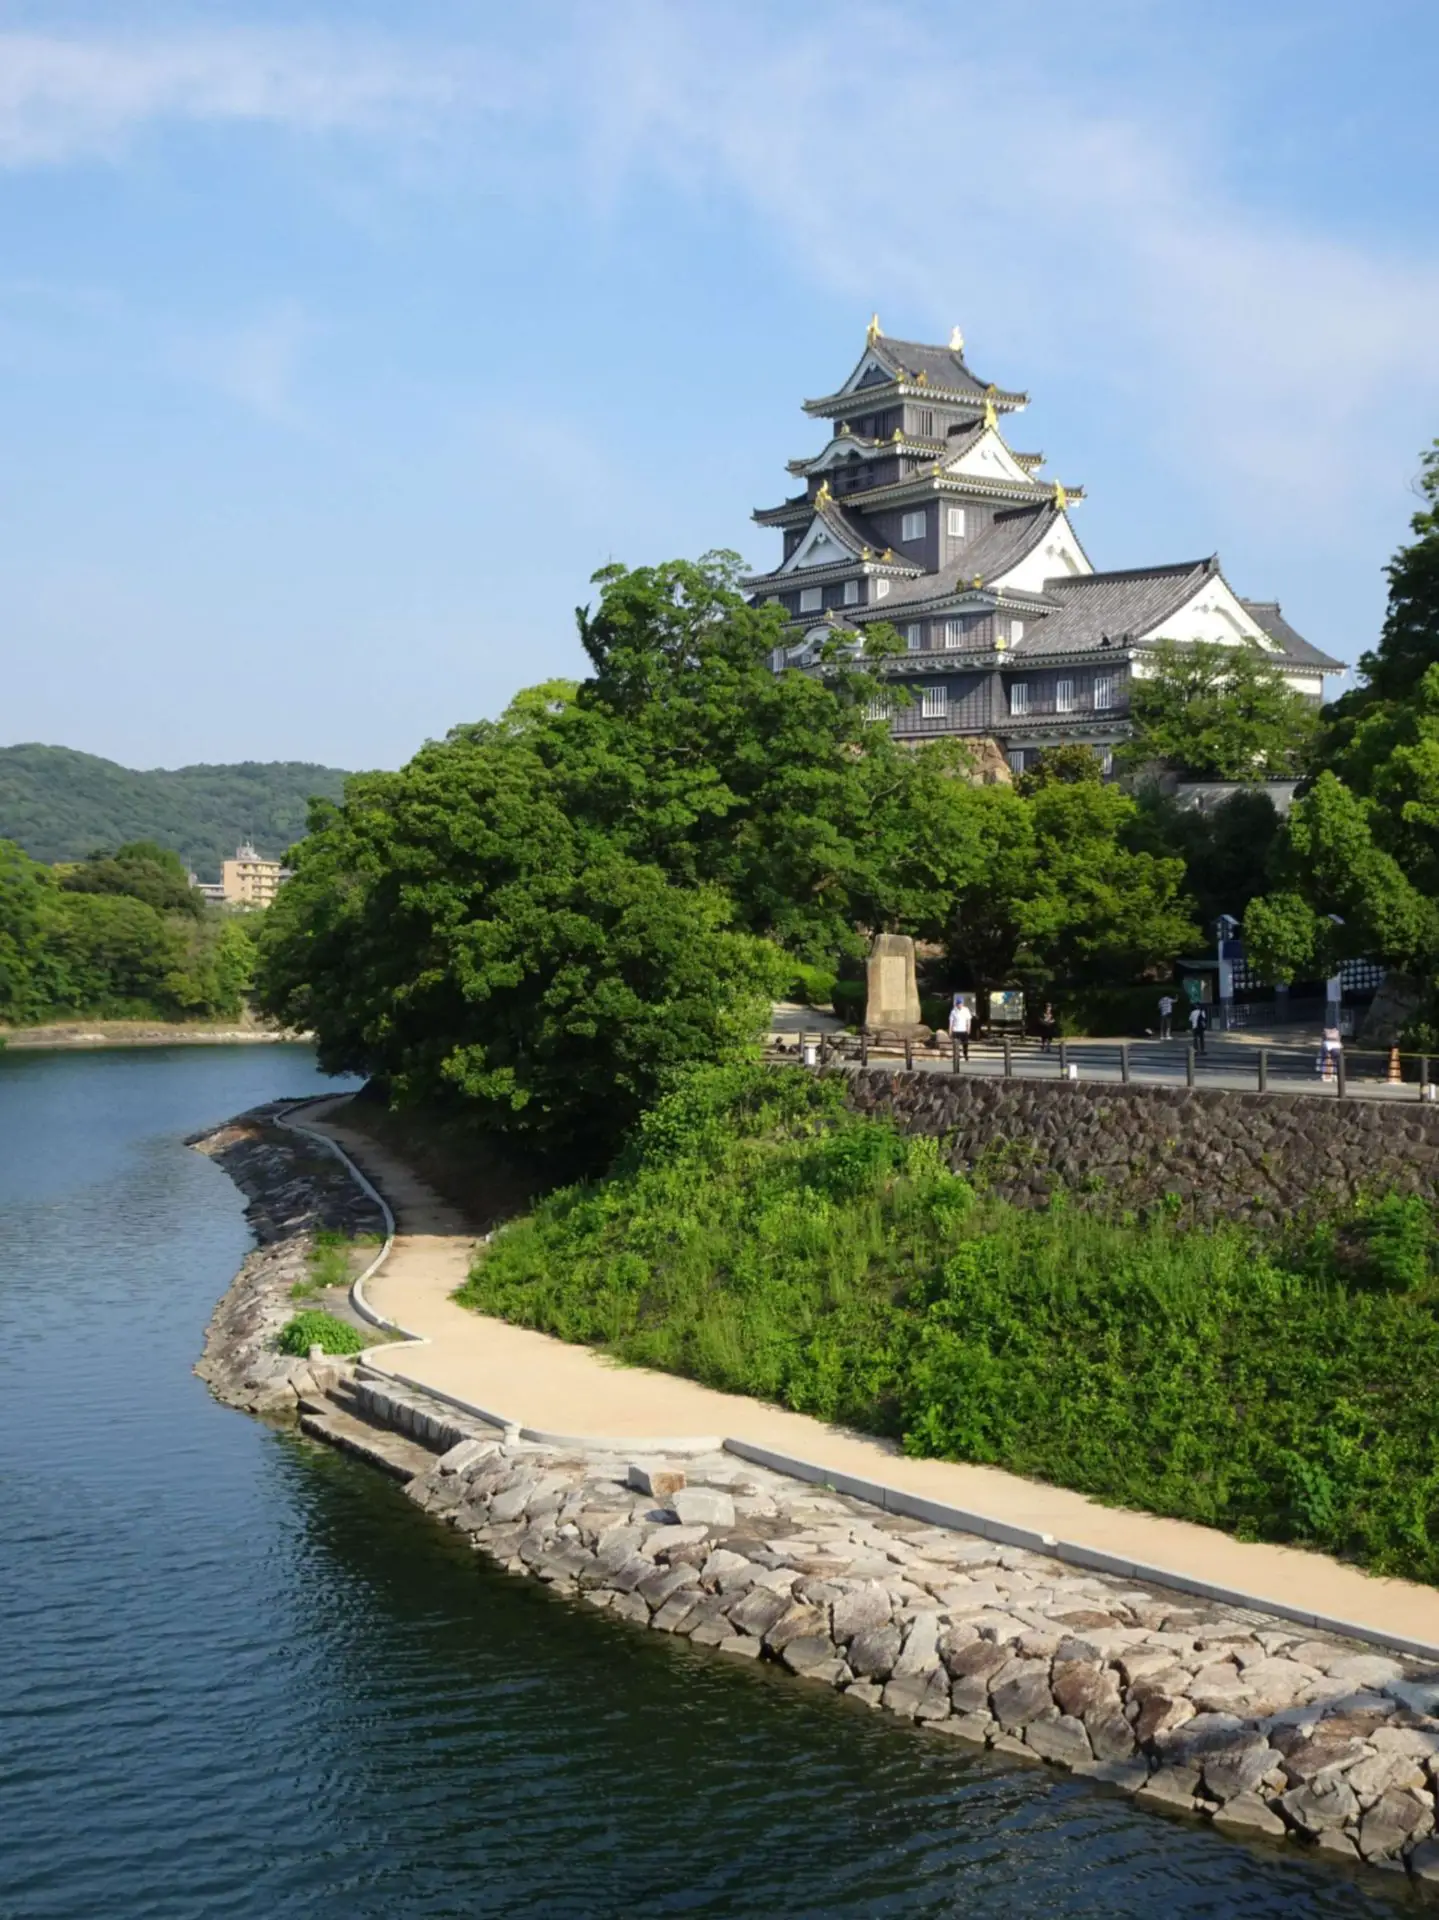 A black Japanese castle seen over a river